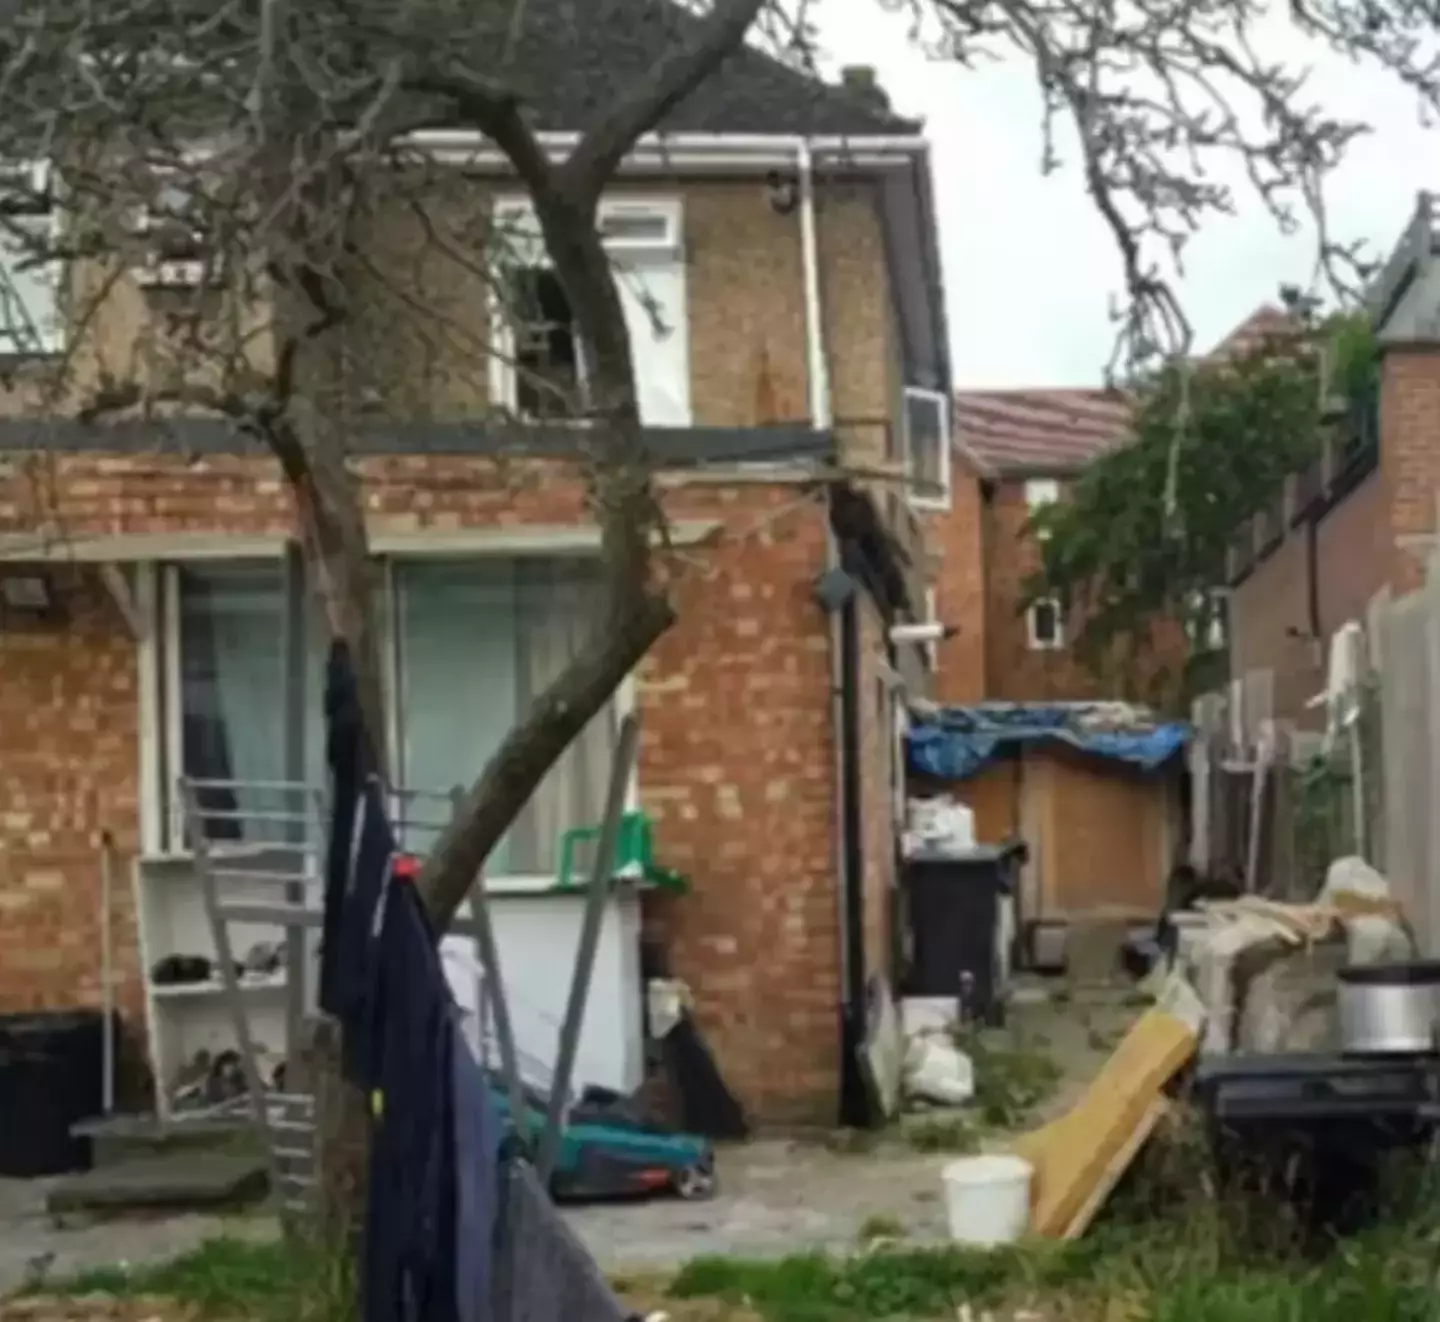 The landlord has been banned from letting out houses for five years.